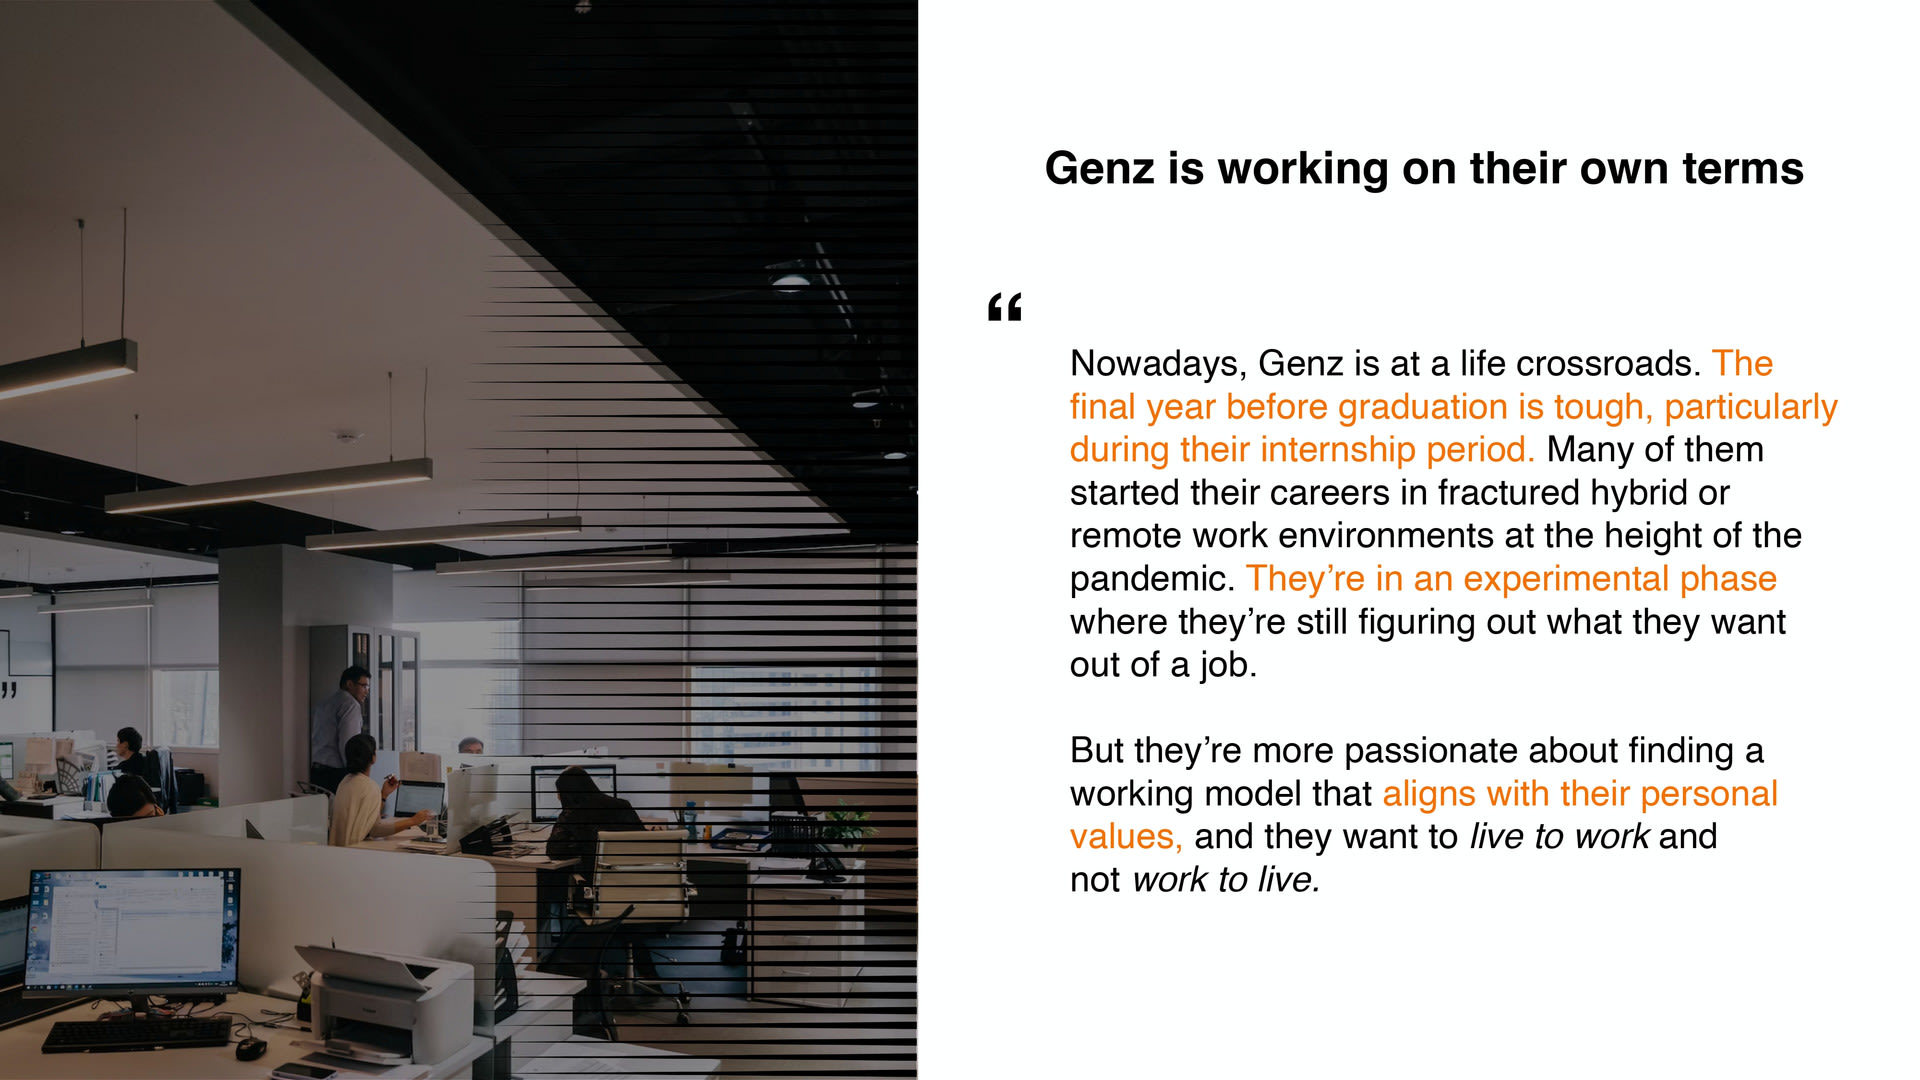 Genz is working on their terms